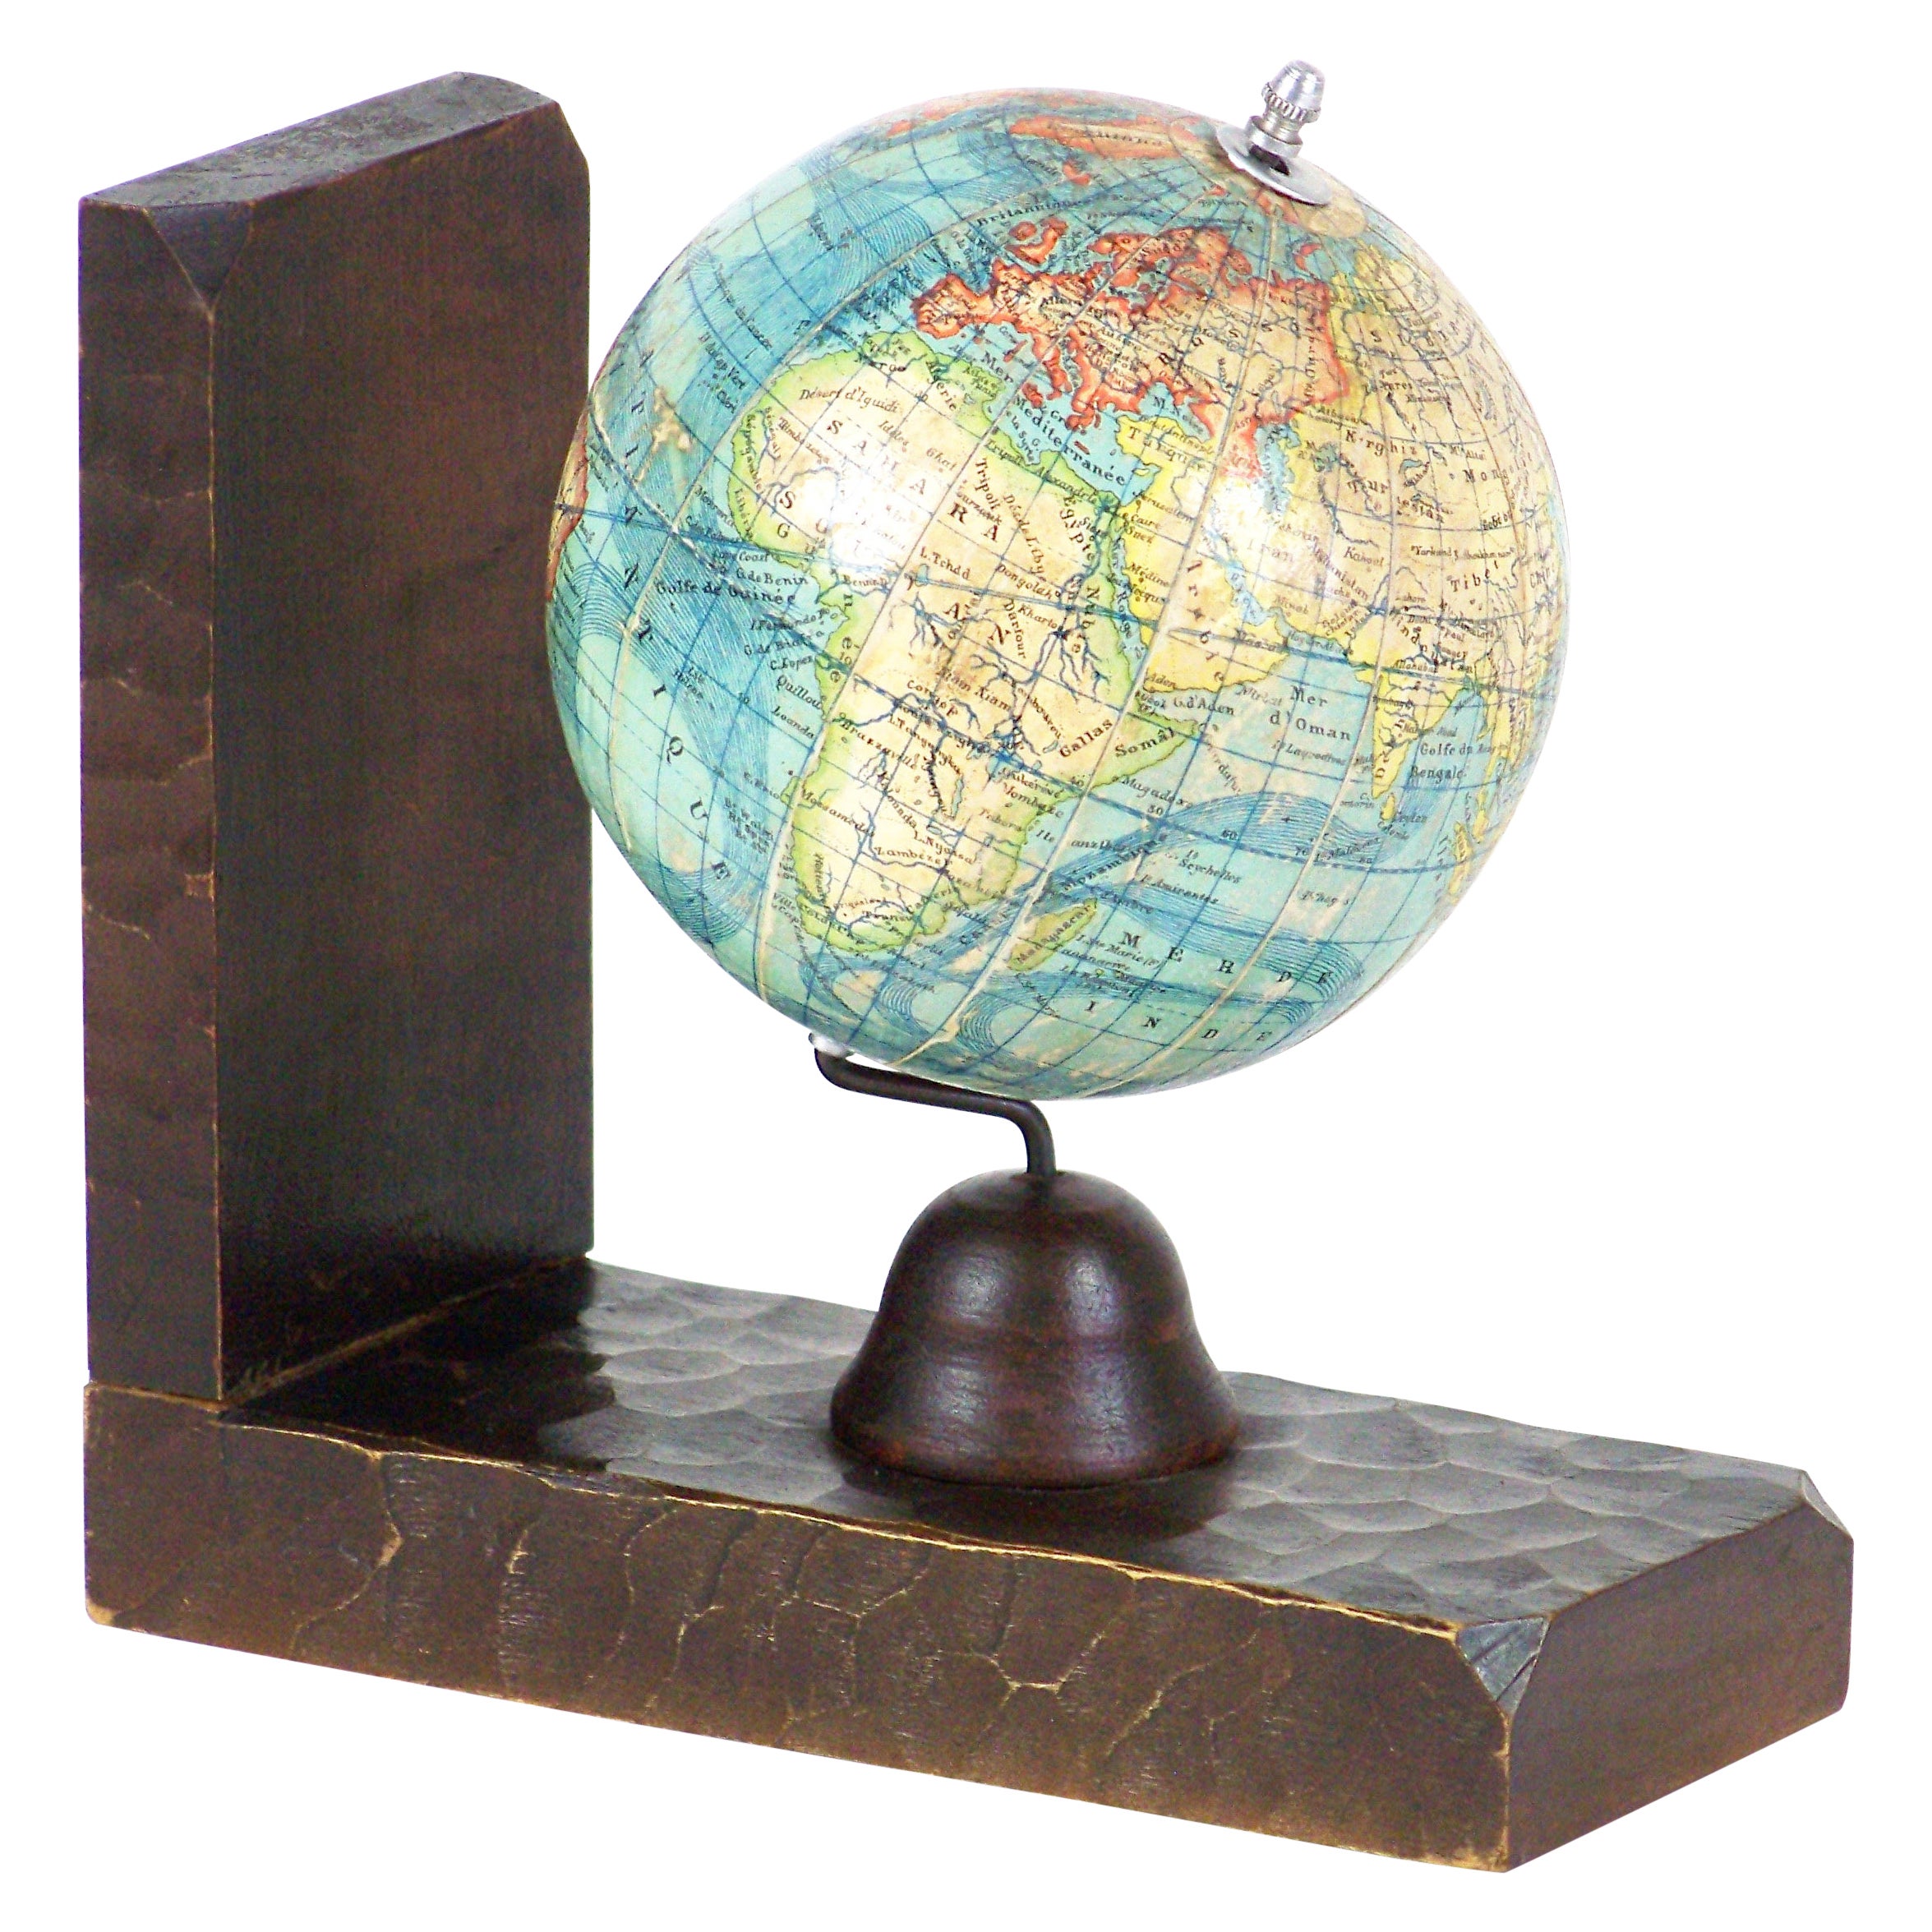 Gift Ideas Book Ends French Vintage World Globe Pair Bookends Home & Office Decor Bookcase Decoration Small Faceted Ball Book Ends